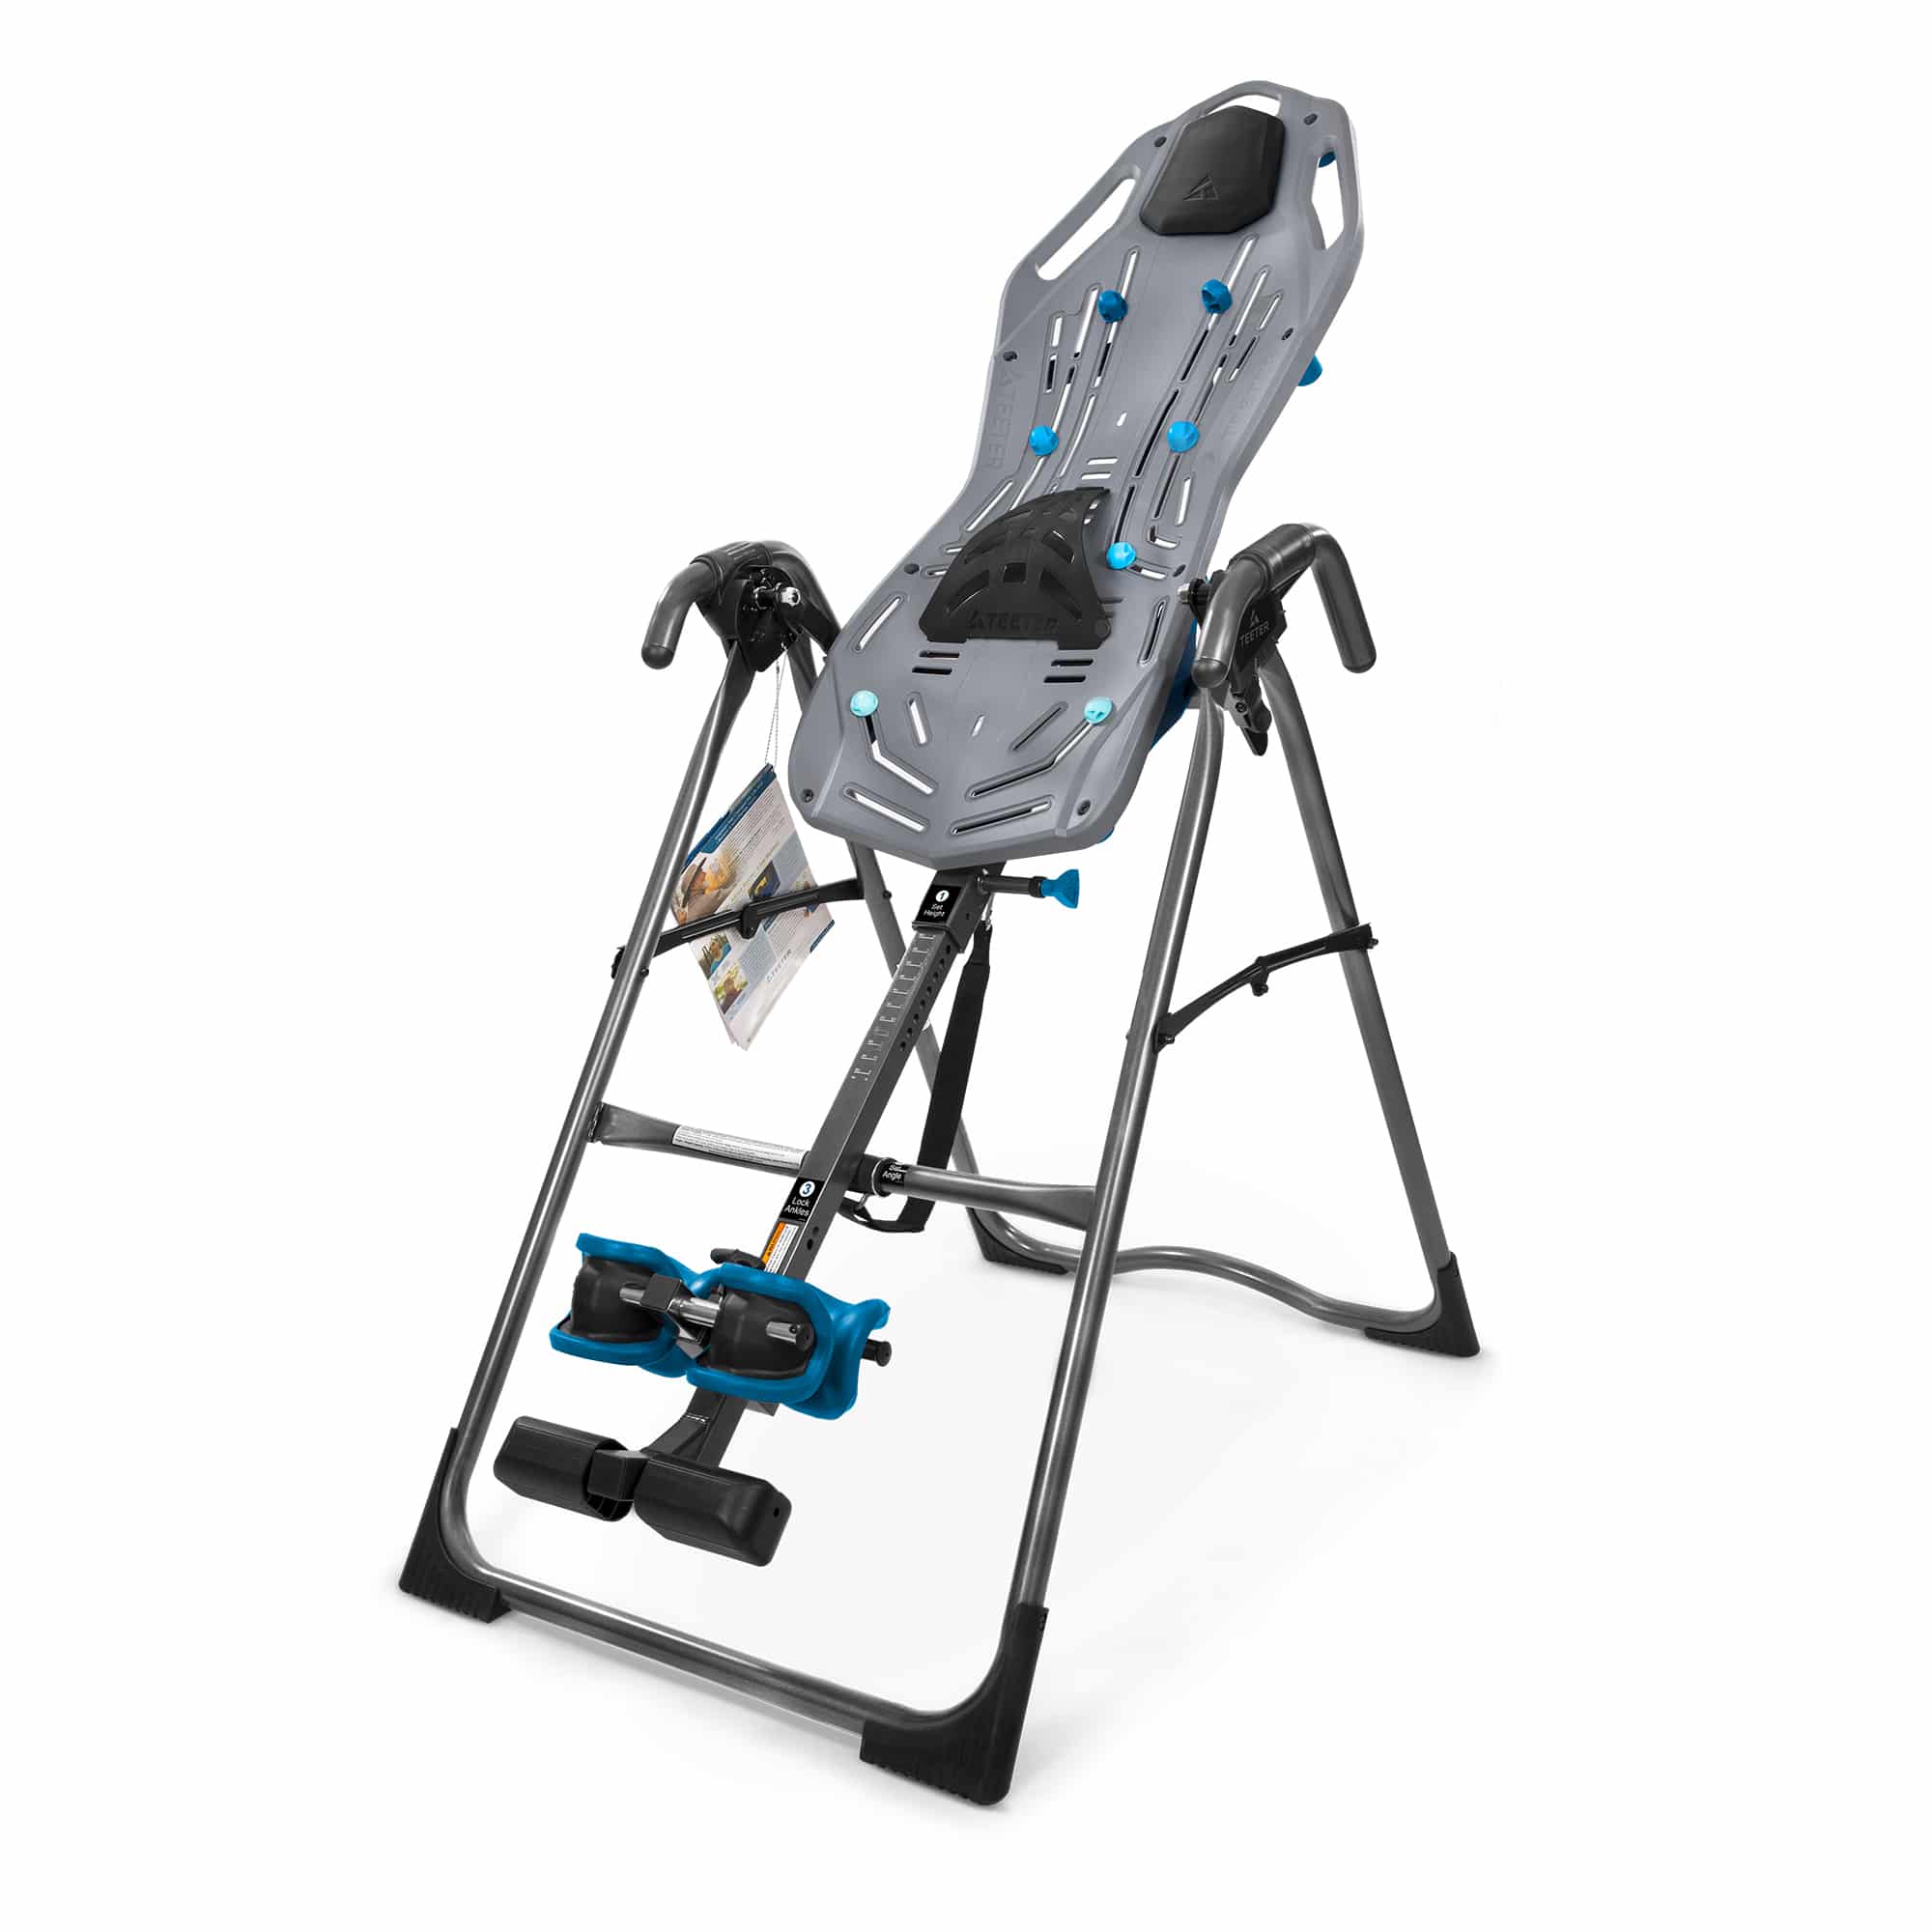 Teeter FitSpine X Inversion table